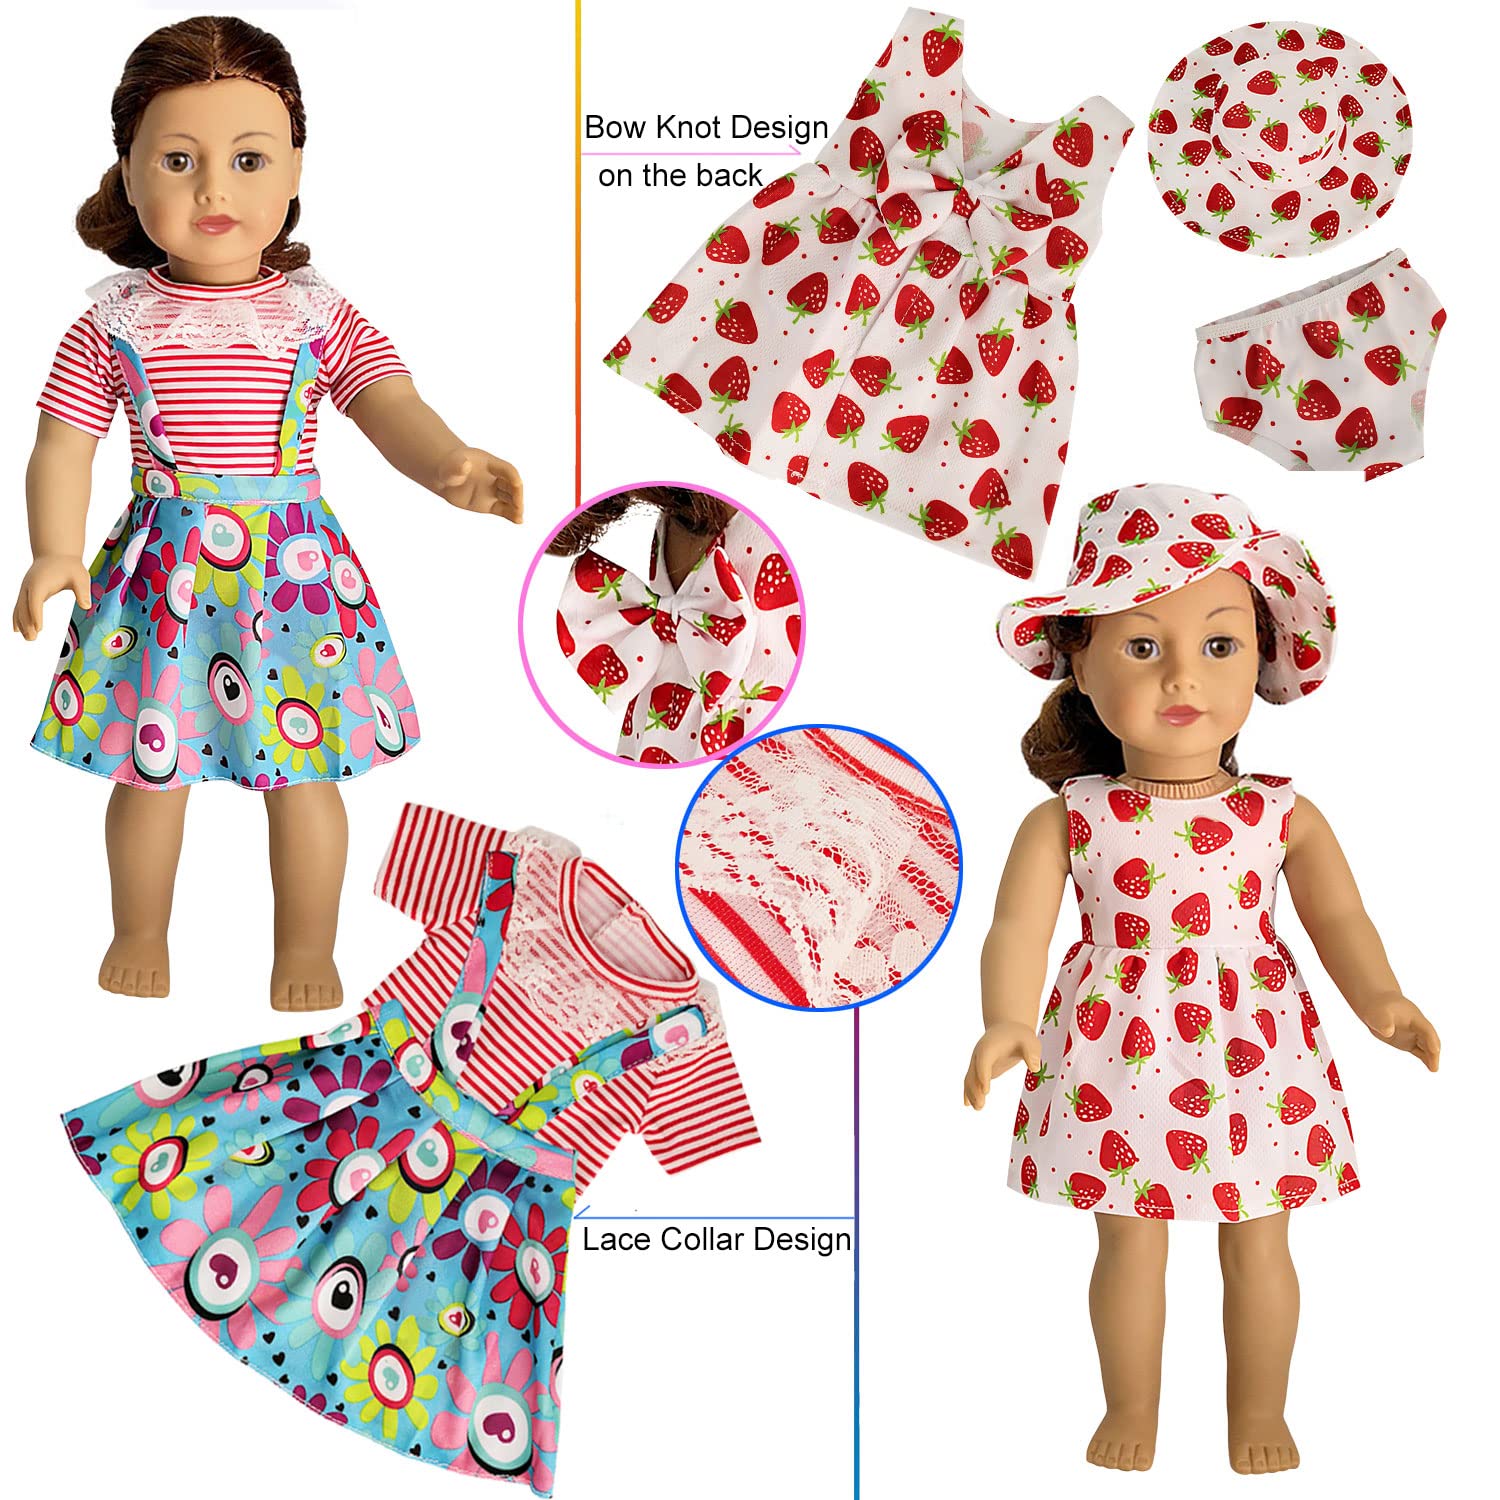 HOAKWA American Doll Clothes and Accessories for 18 Inch Doll, 18